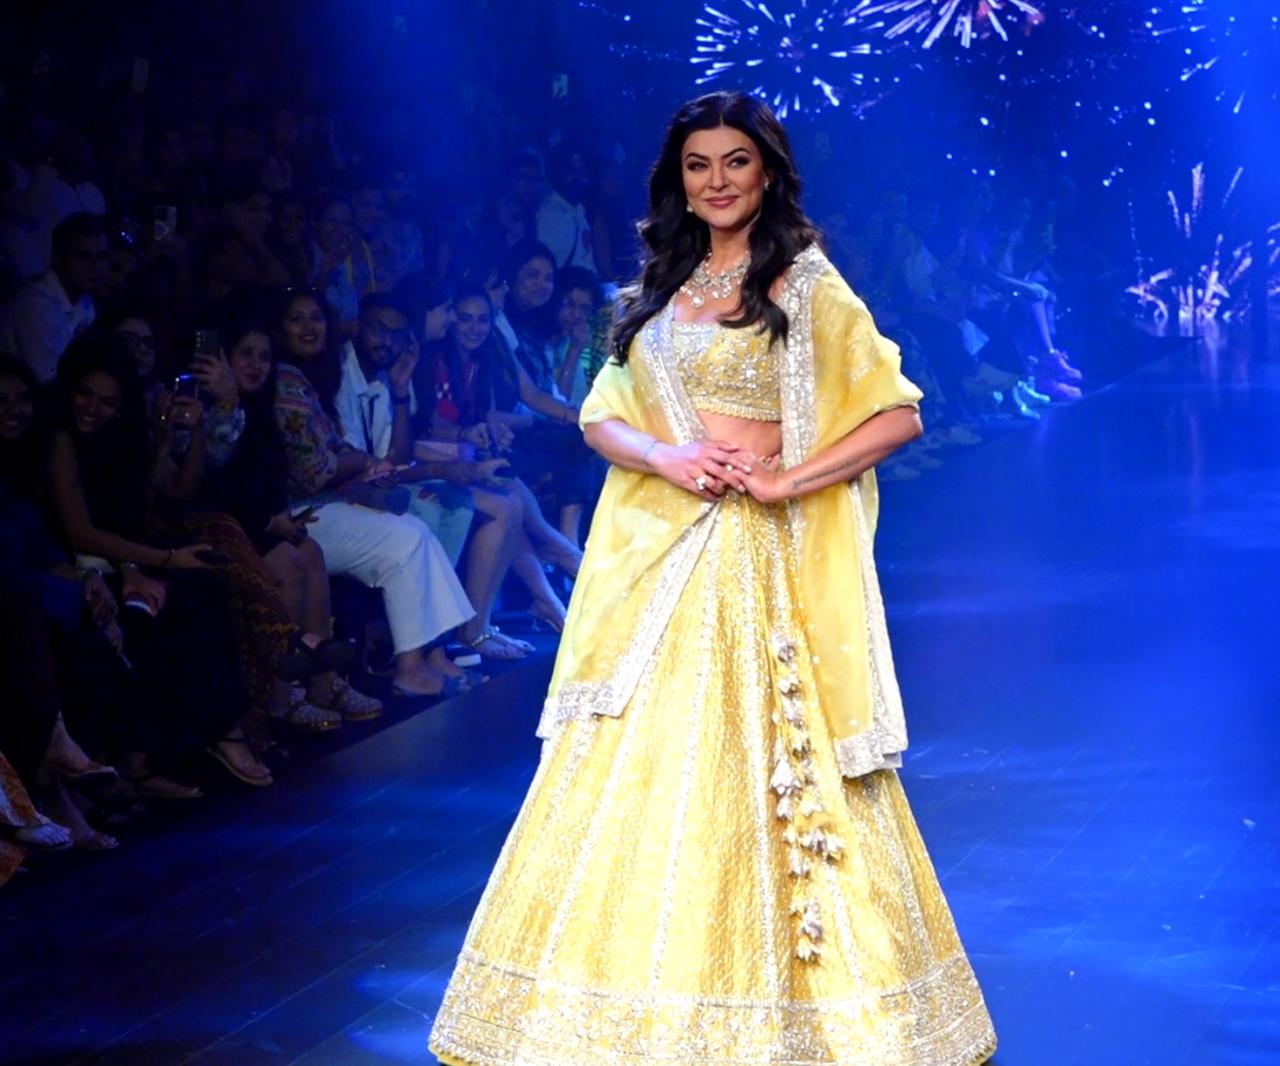 Post surviving a major heart attack, Sushmita Sen returned with a walk on the ramp in this bright lehenga exuding grace and warmth